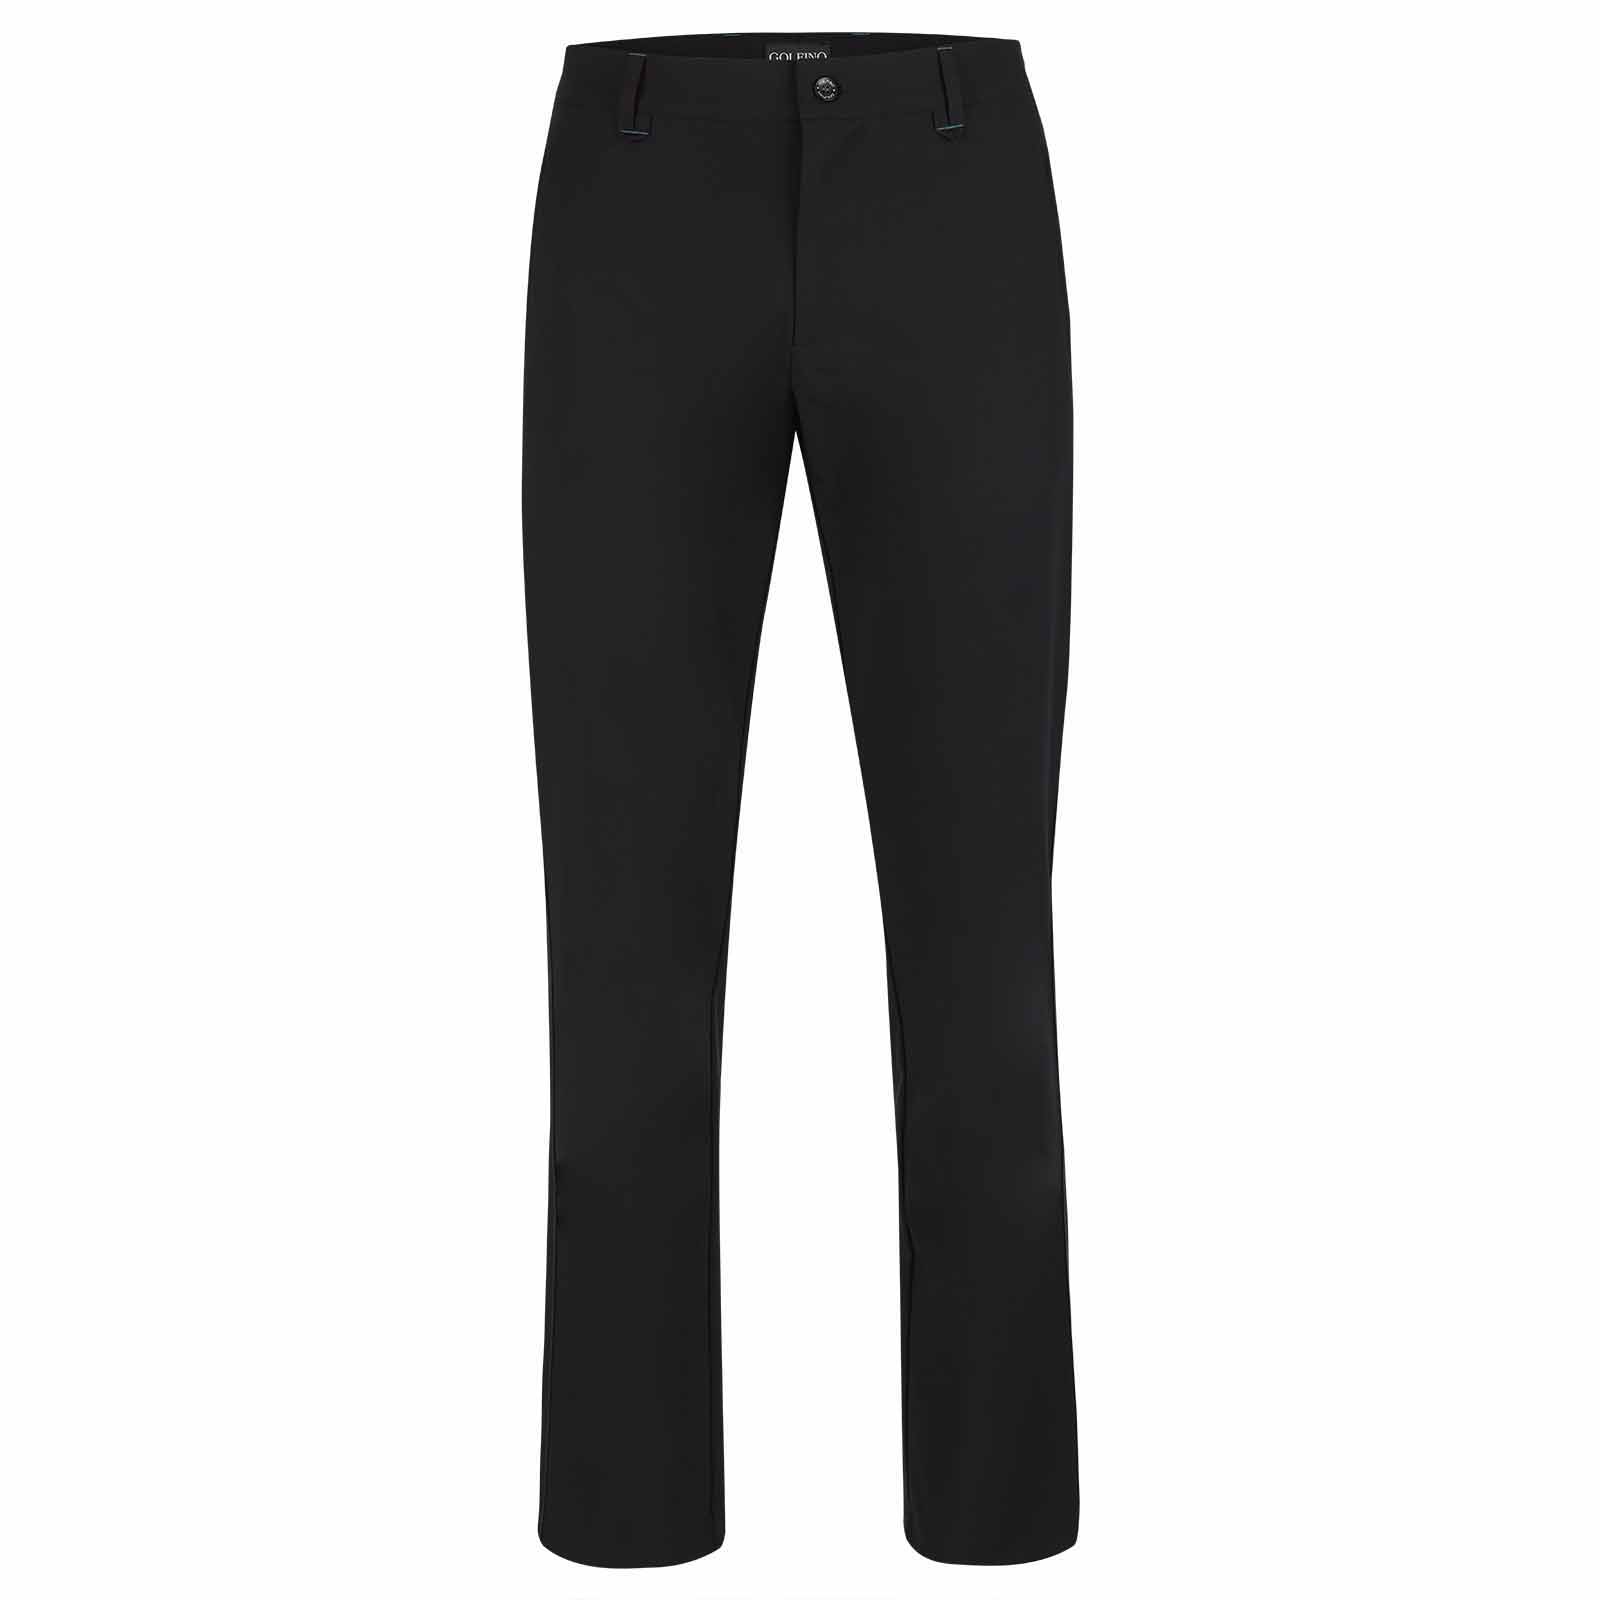 Men's golf pants with extra stretch comfort in slim fit